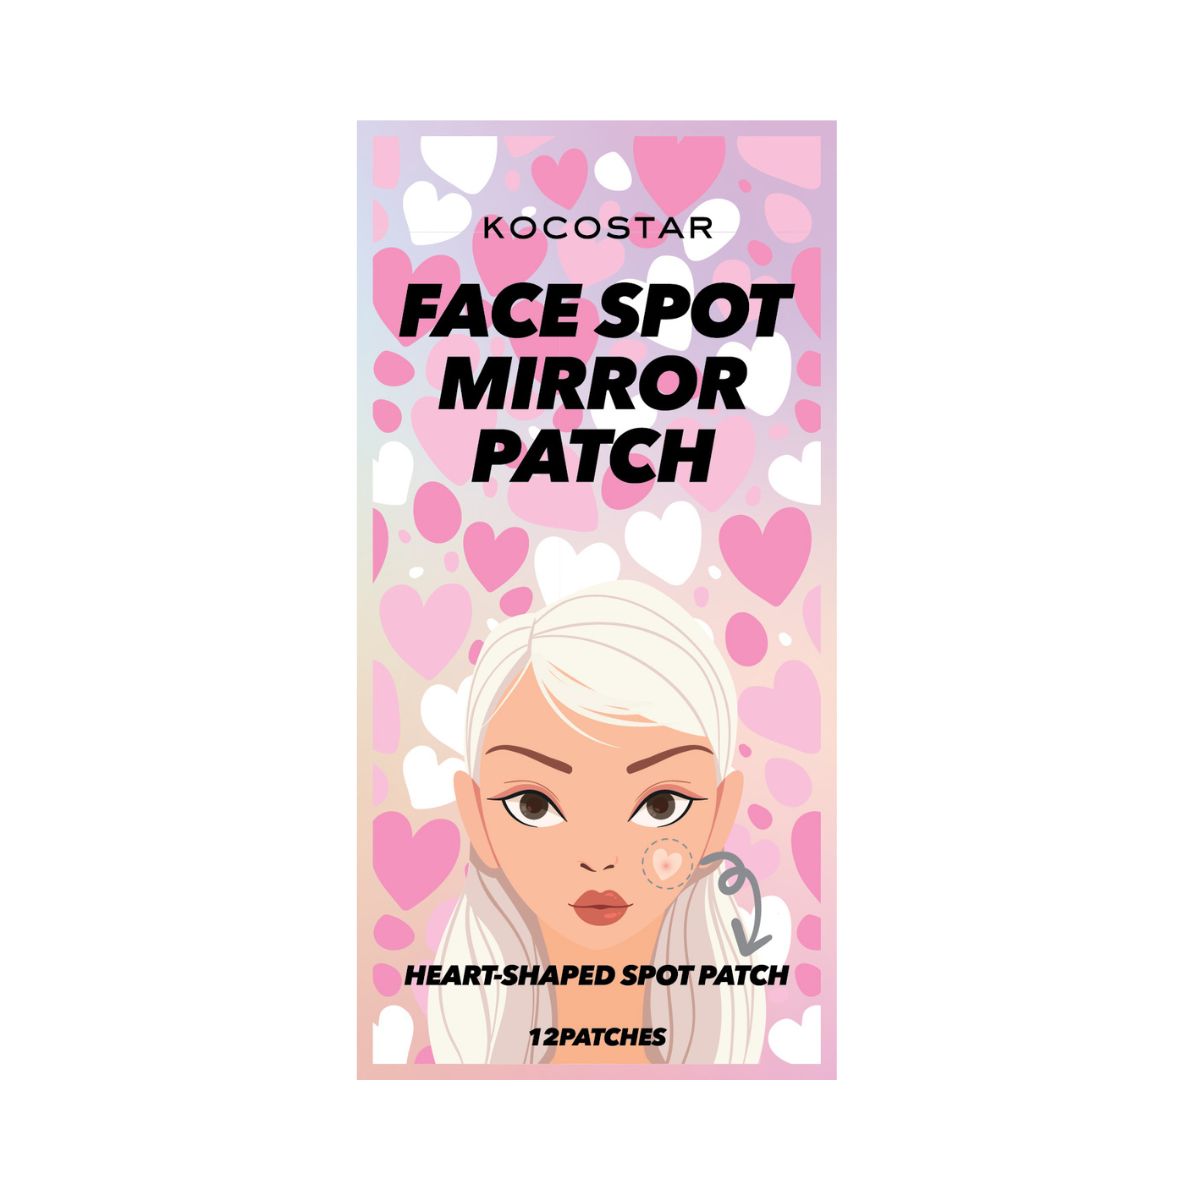 KOCOSTAR H2T FACE SPOT MIRROR PATCH 38 PATCHES - skin care